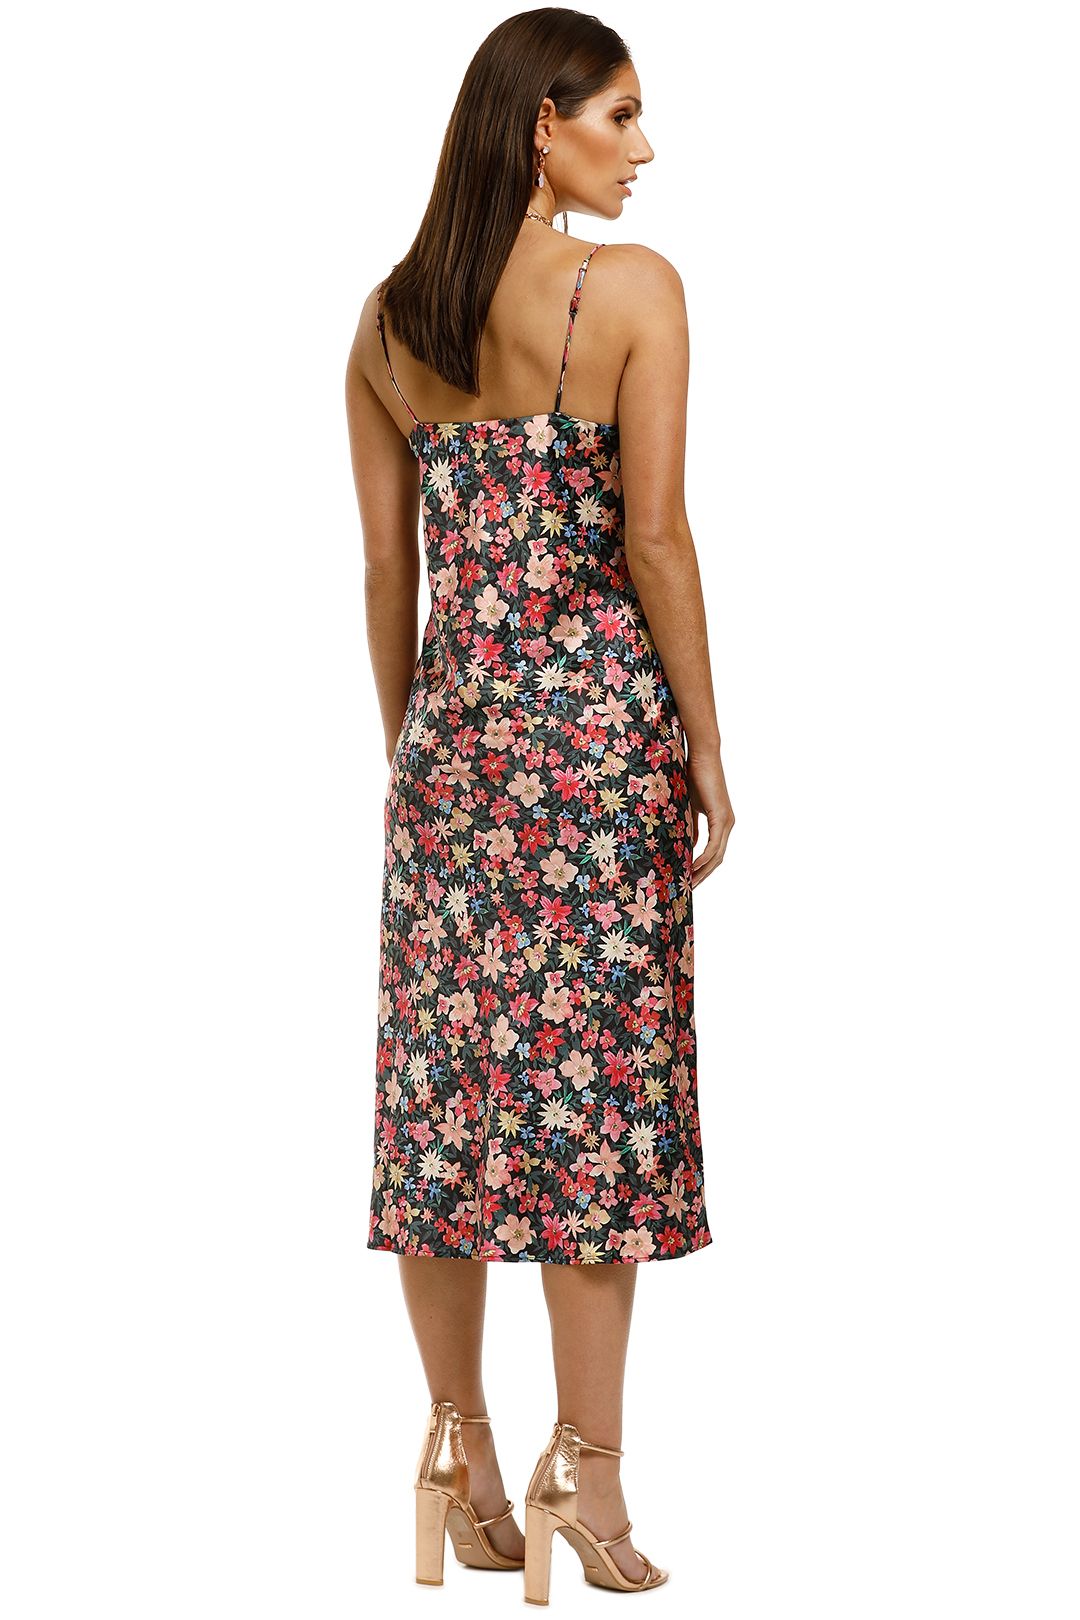 CMEO-Collective-Time-Flew-SS-Dress-Black-Garden-Floral-Back